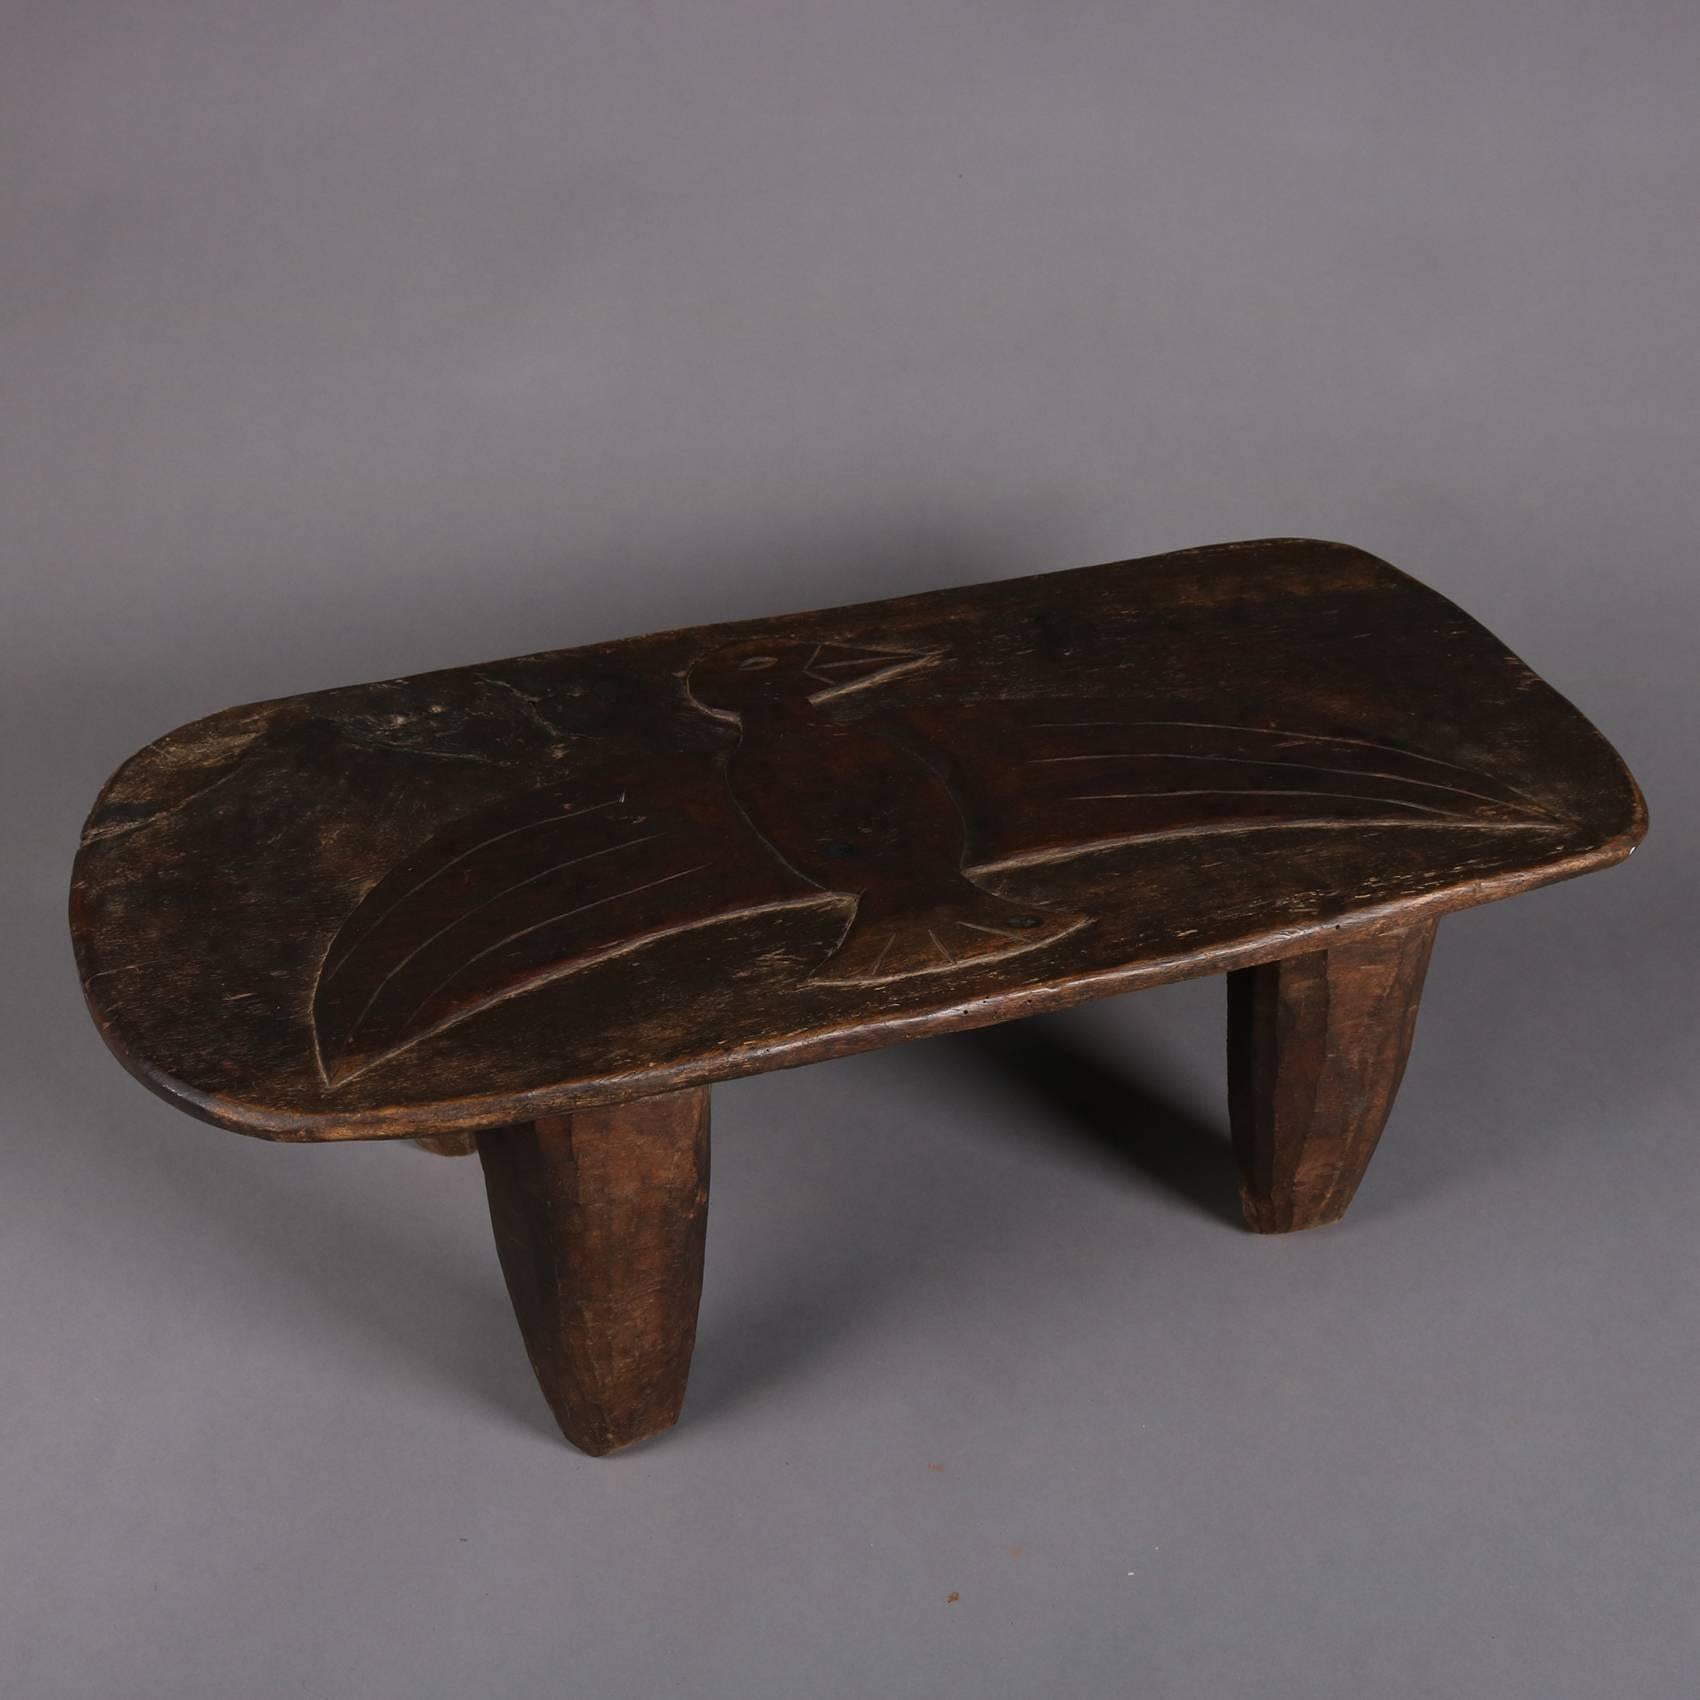 Wood Folk Art Oaxacan Hand-Carved Primitive Low Bench with Eagle, 19th Century